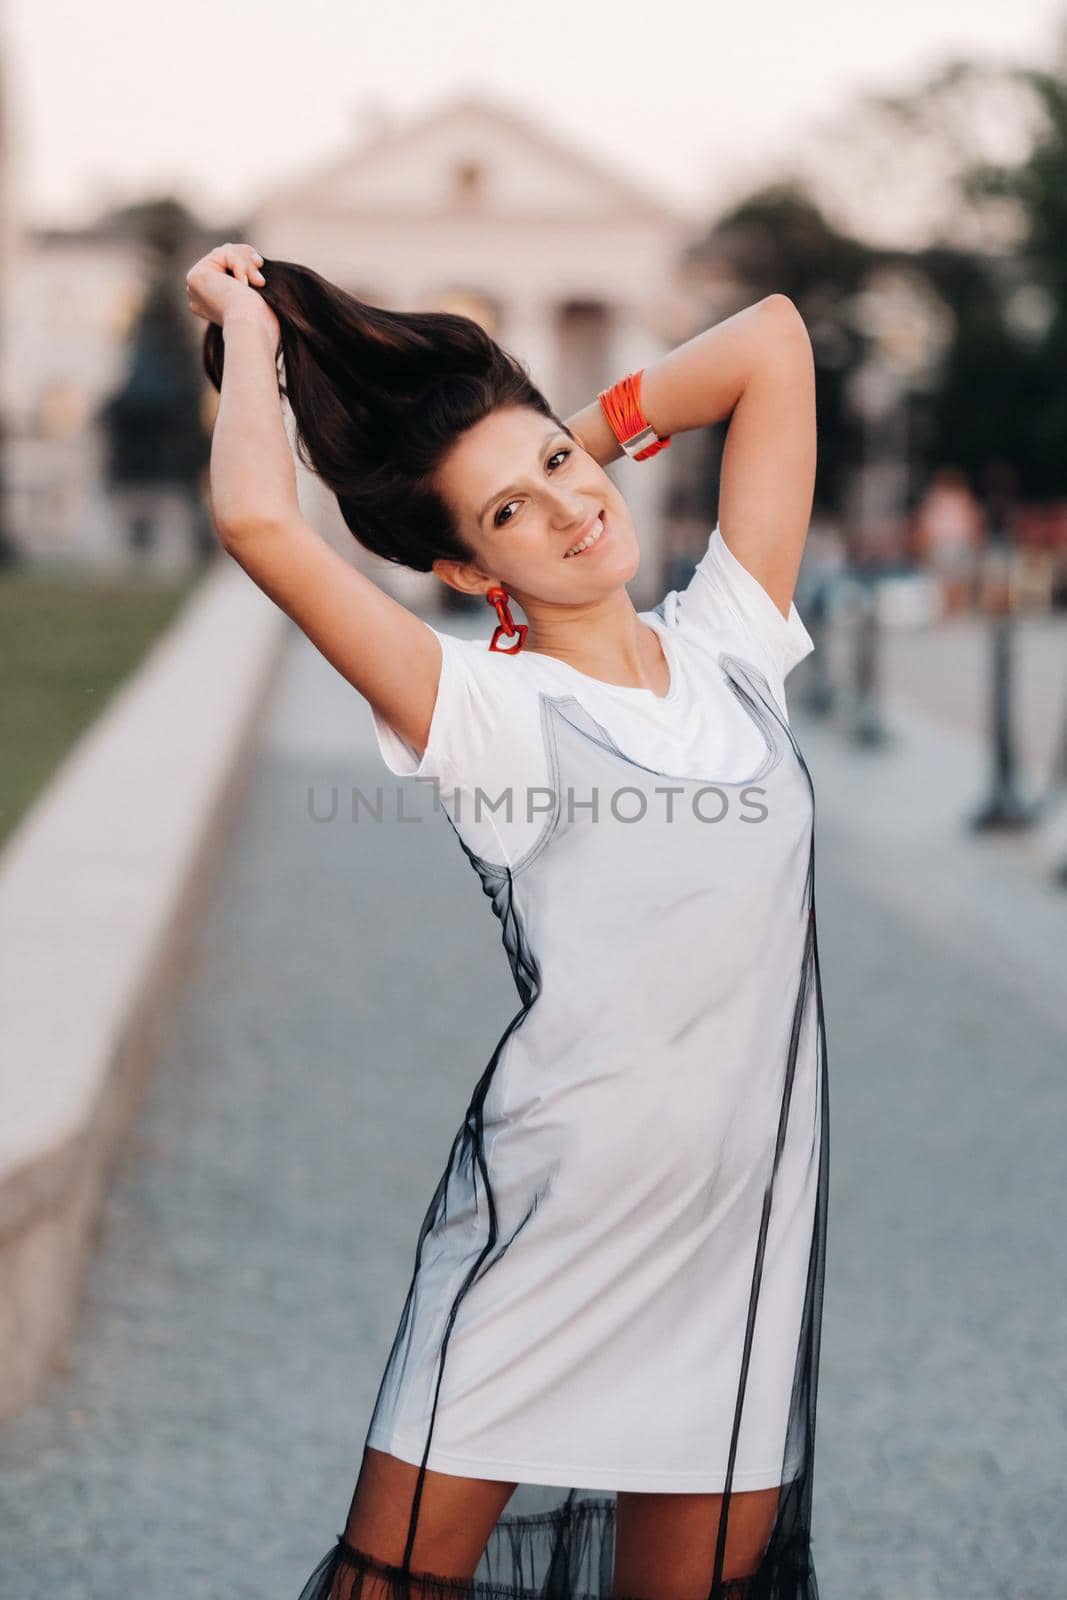 A girl with long hair with red earrings in white clothes walks around the city.The model holds her hair in her hands and smiles.